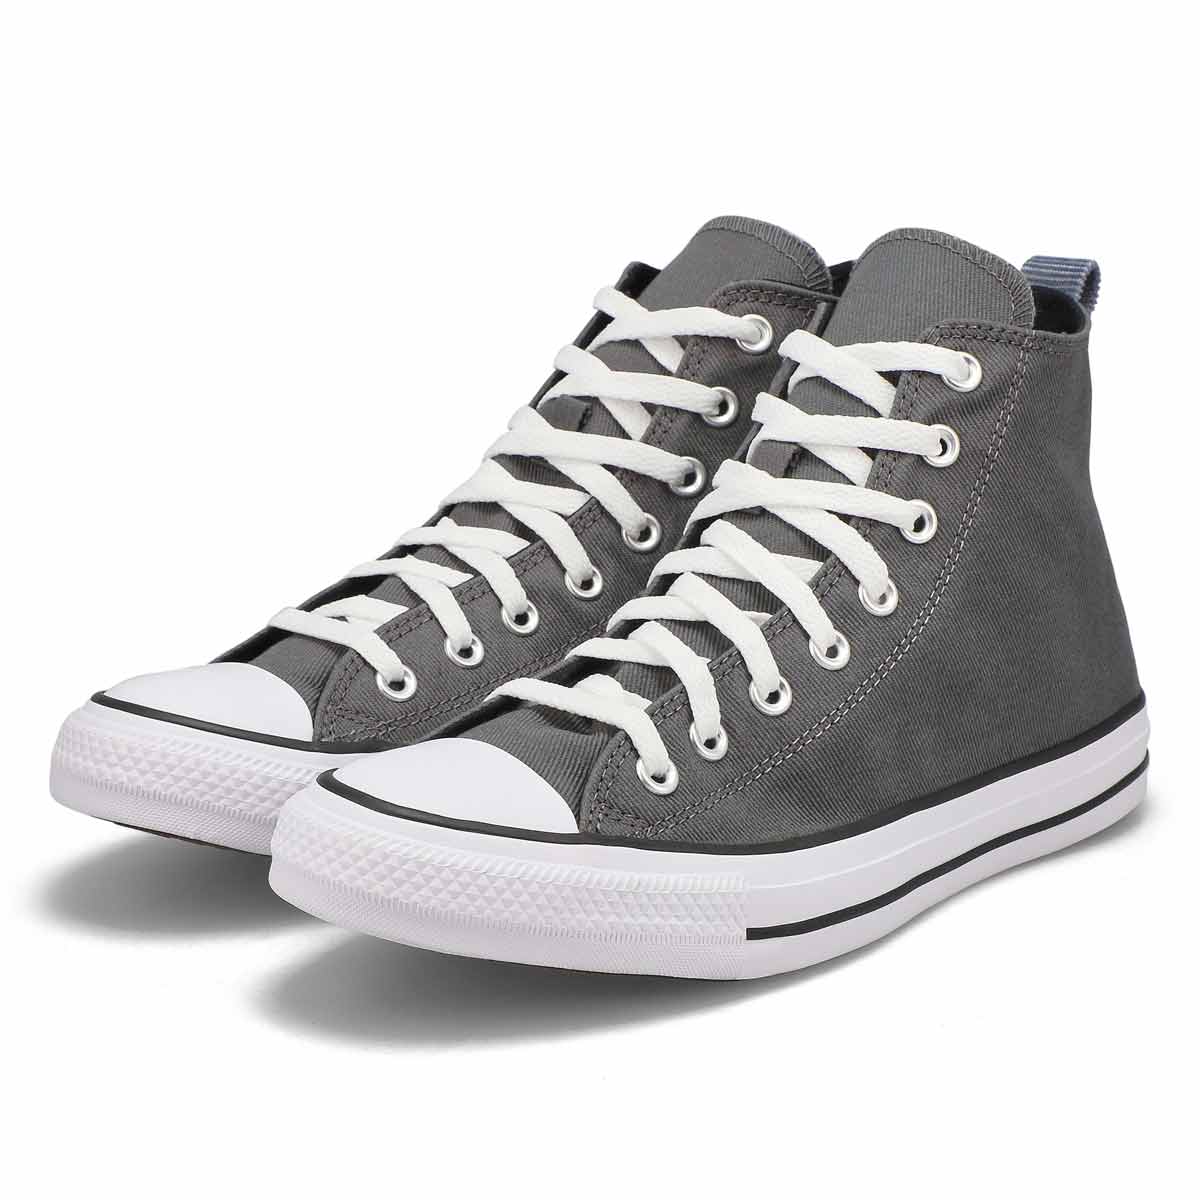 Converse Men's CT All Star Workwear Textures | SoftMoc.com